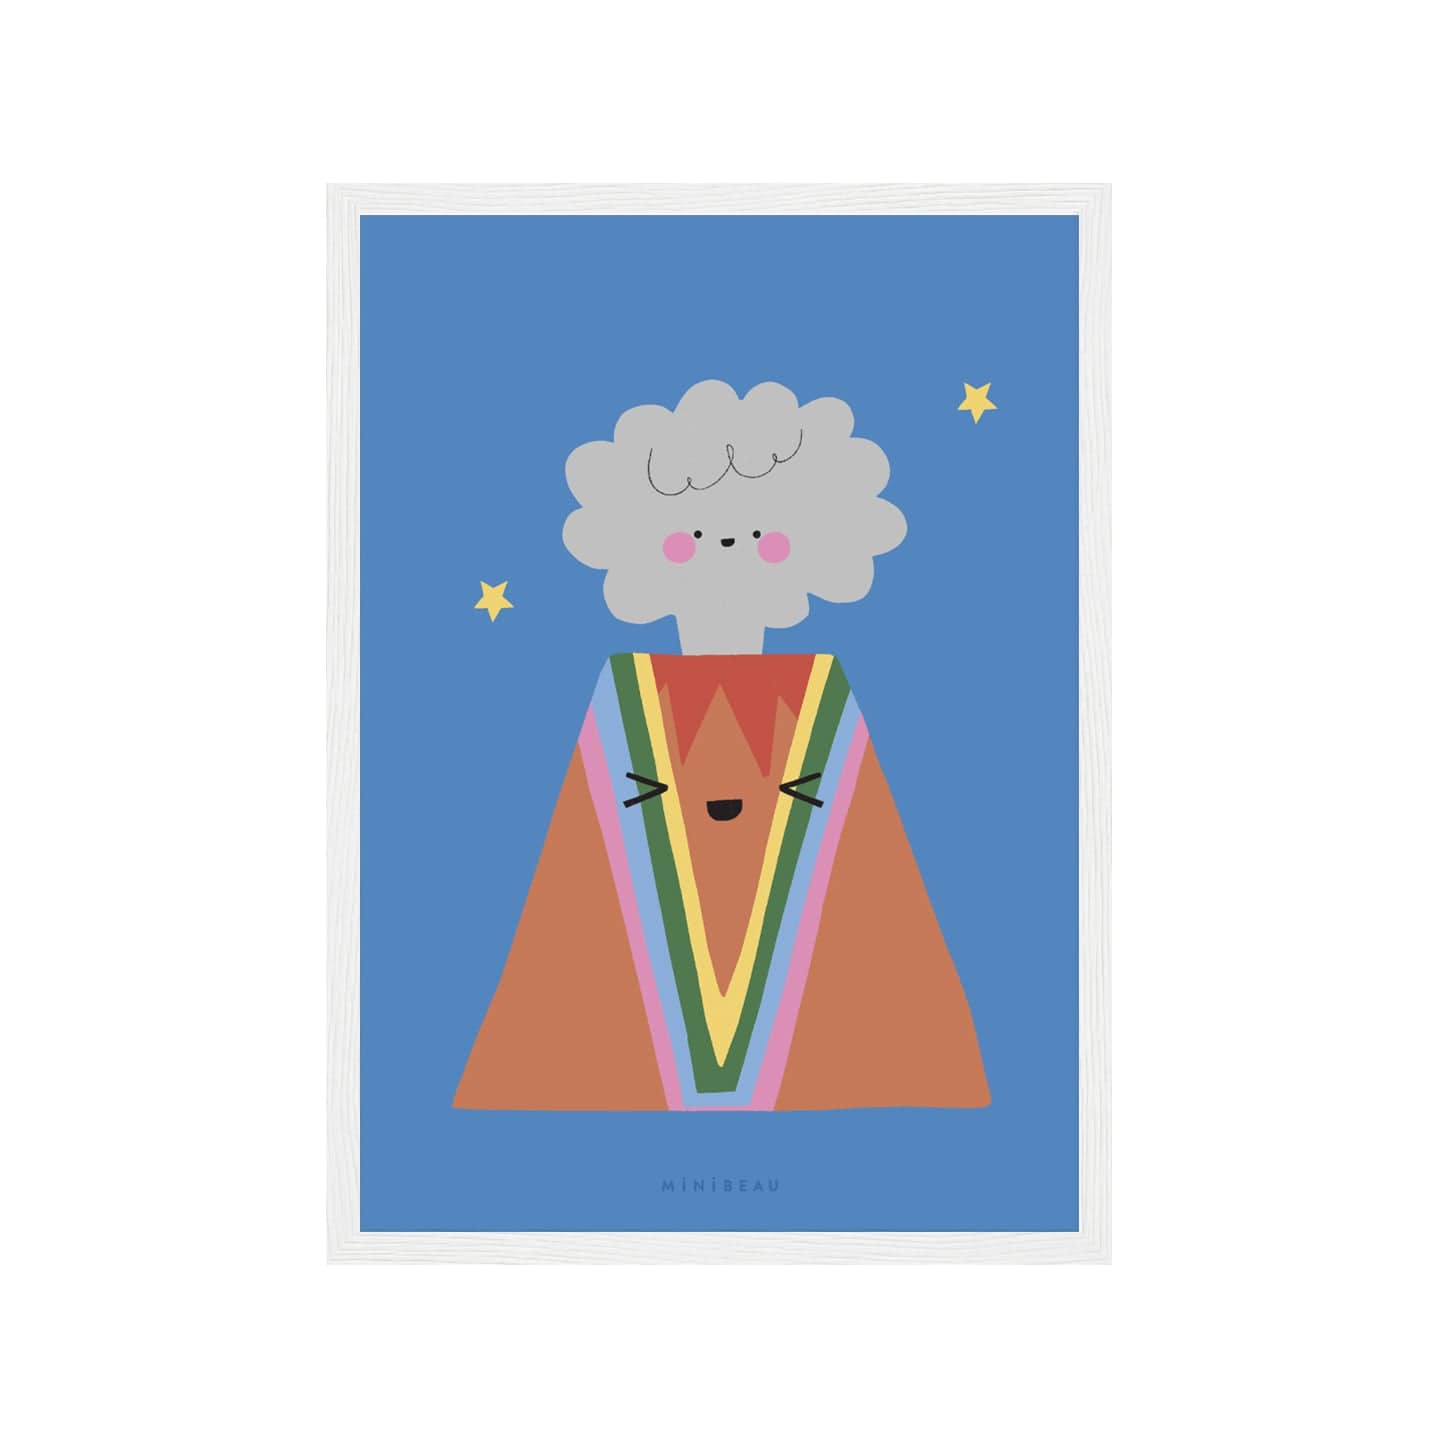 Art print in a white frame. Our Happy Alphabet 'V' Art Print shows an erupting volcanow with a smiling plume of smoke and the lava in rainbow colours running down the volcano, forming a V on a blue background with stars.